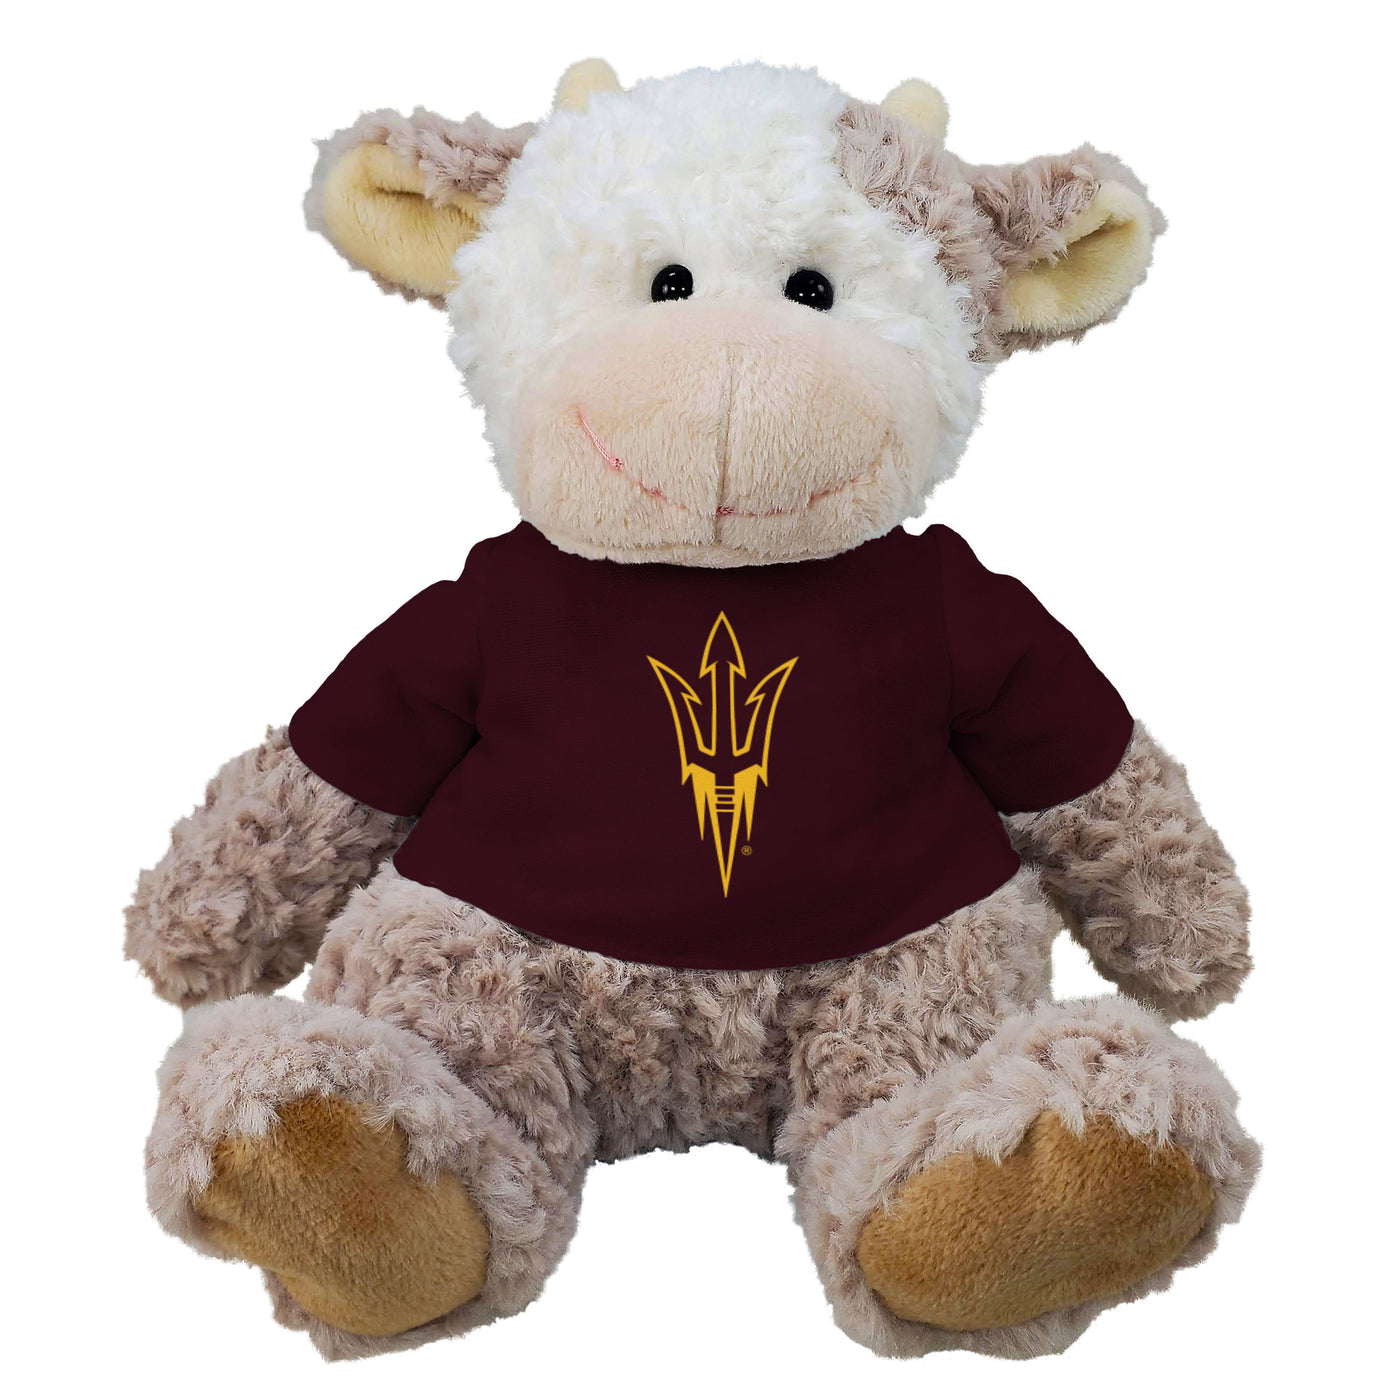 ASU stuffed brown and white cow with little horns. Cow is wearing a maroon shirt with a gold pitchfork outline. 